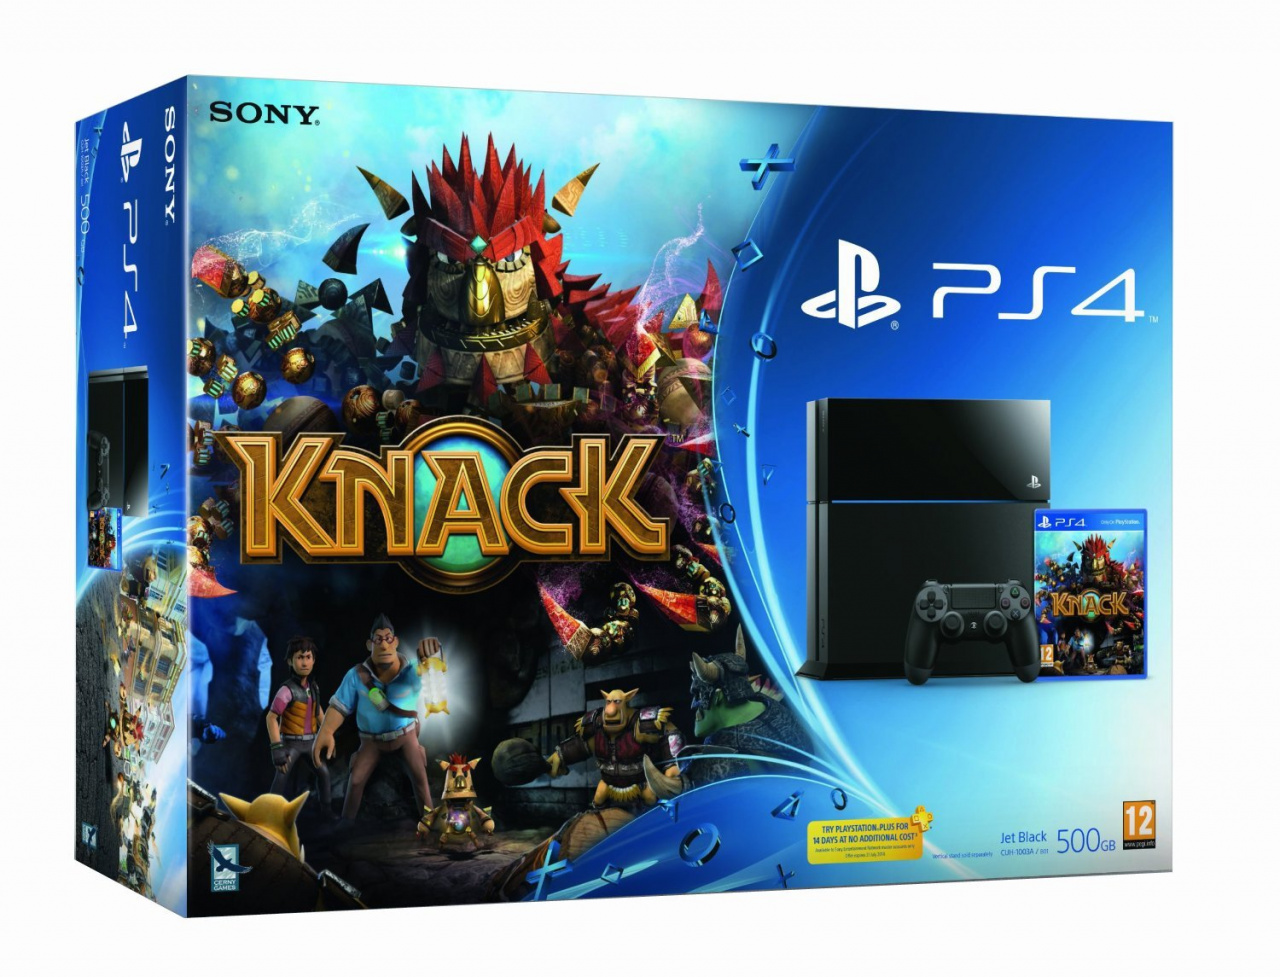 Amazon UK Offers One Last Chance to Snag PS4 Stock Before Christmas ...